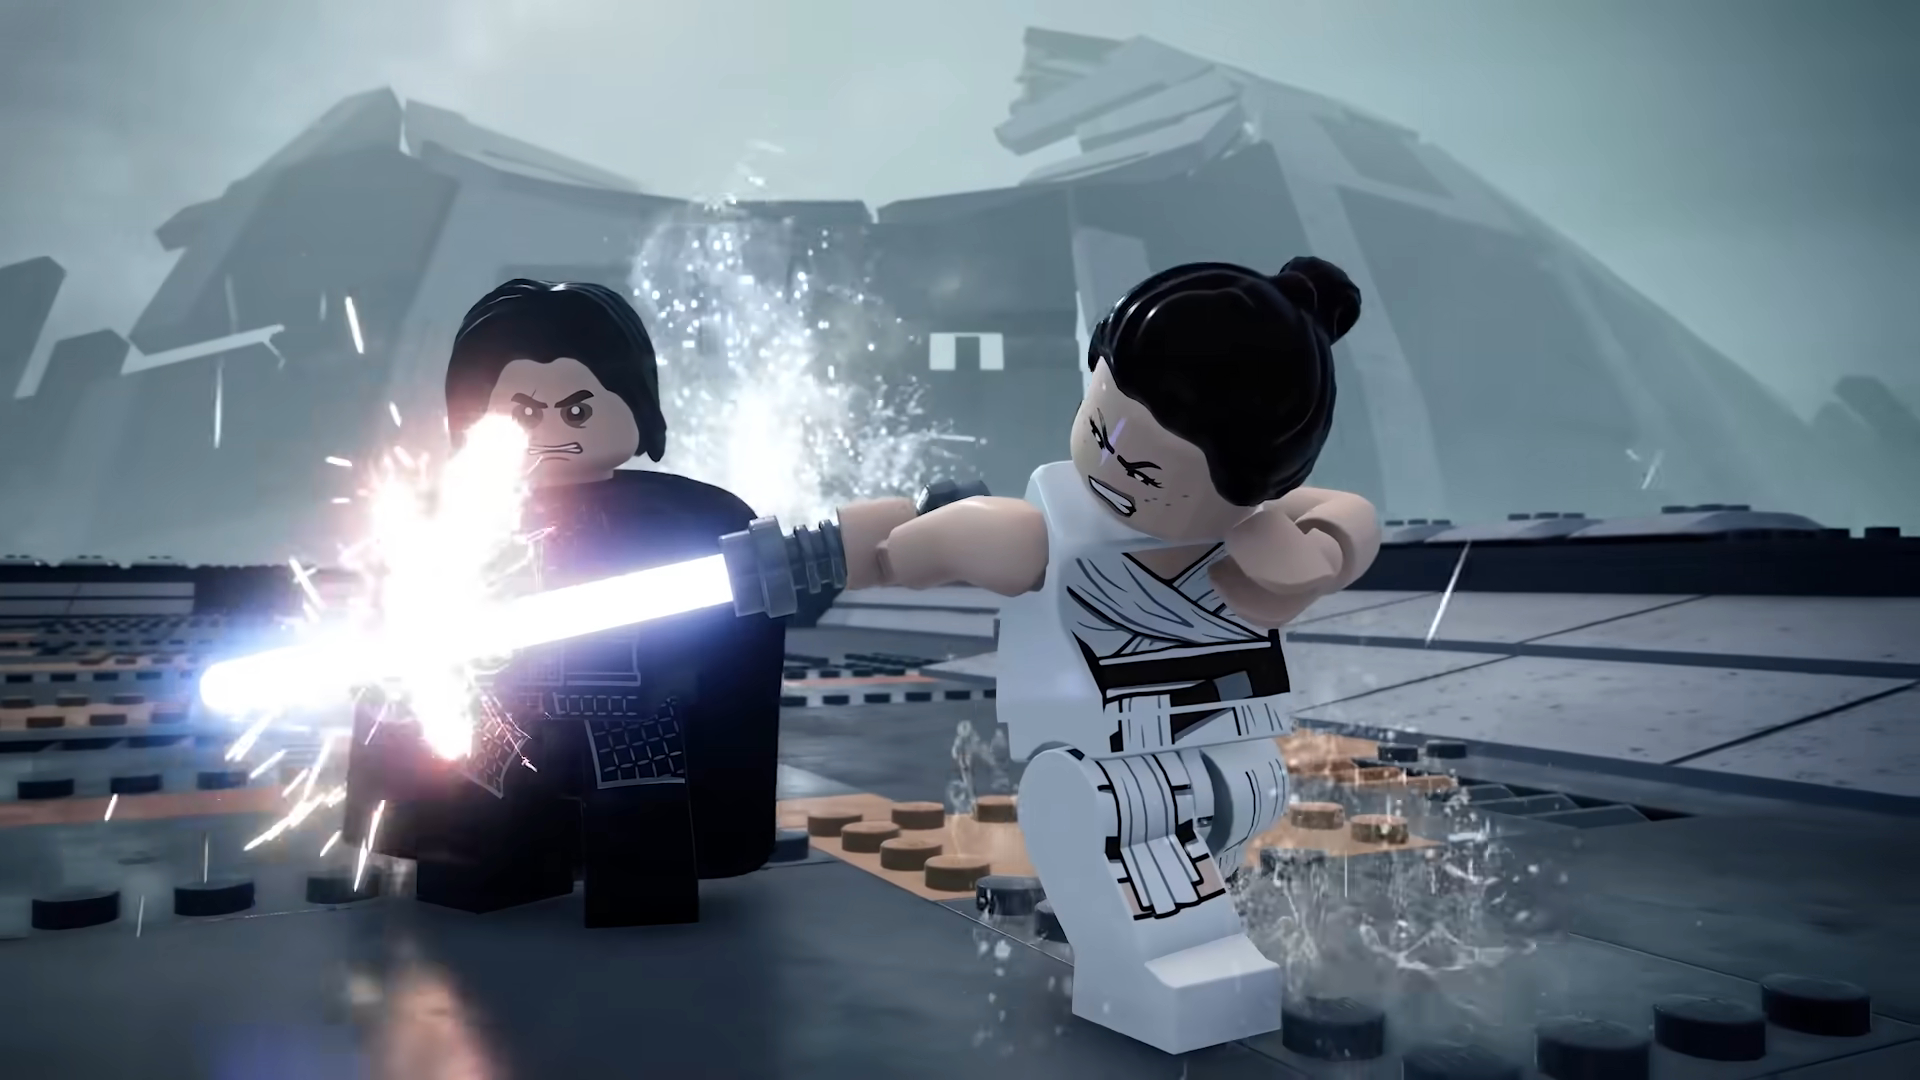 How to play co-op in LEGO Star Wars Skywalker Saga - Pro Game Guides